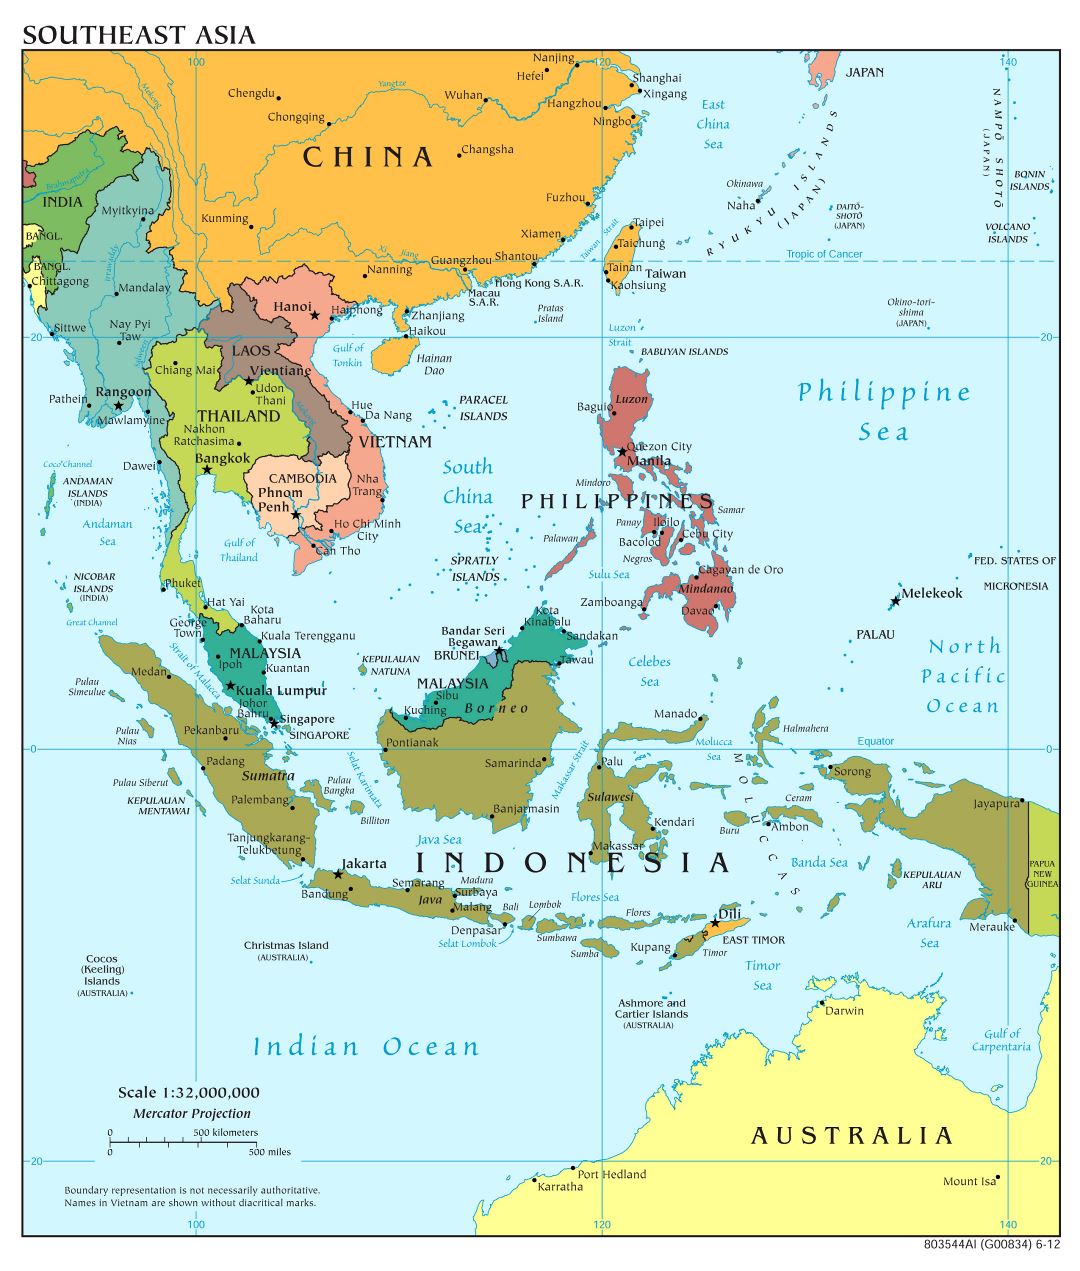 Large scale political map of Southeast Asia - 2012